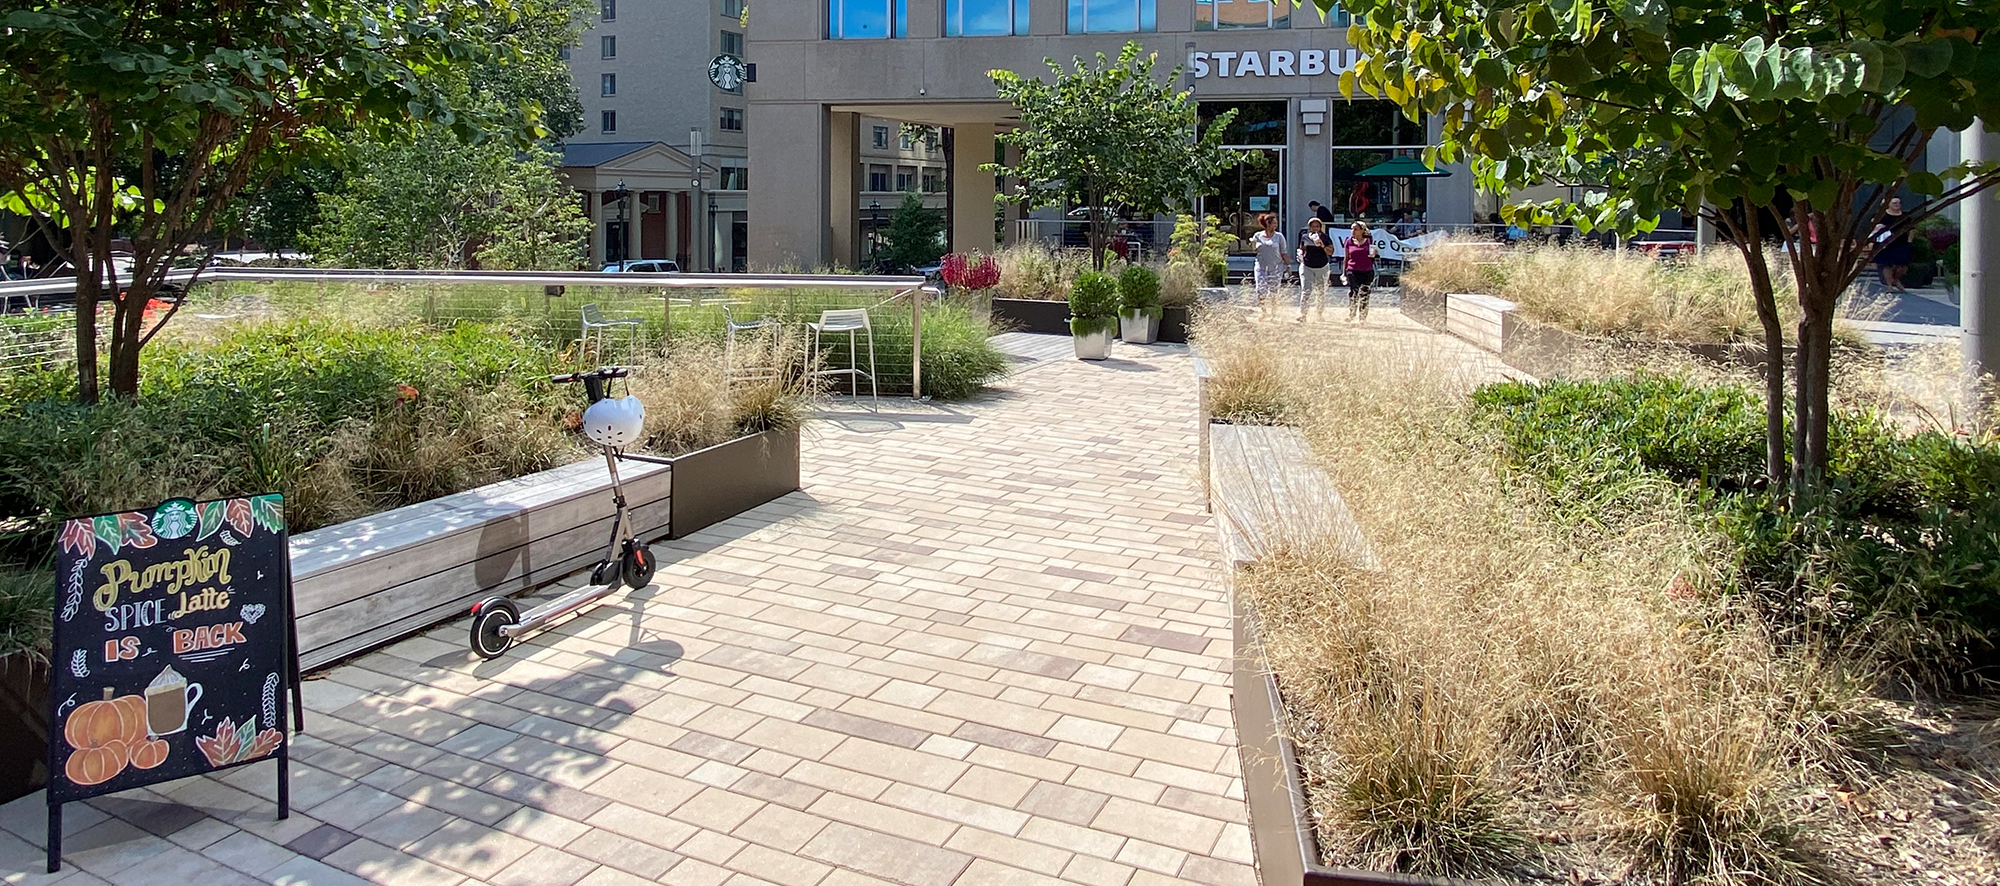 Three women walk out of a Starbucks onto a garden-lined pedestrian path made with Artline rectangular pavers in a mix of warm colors.